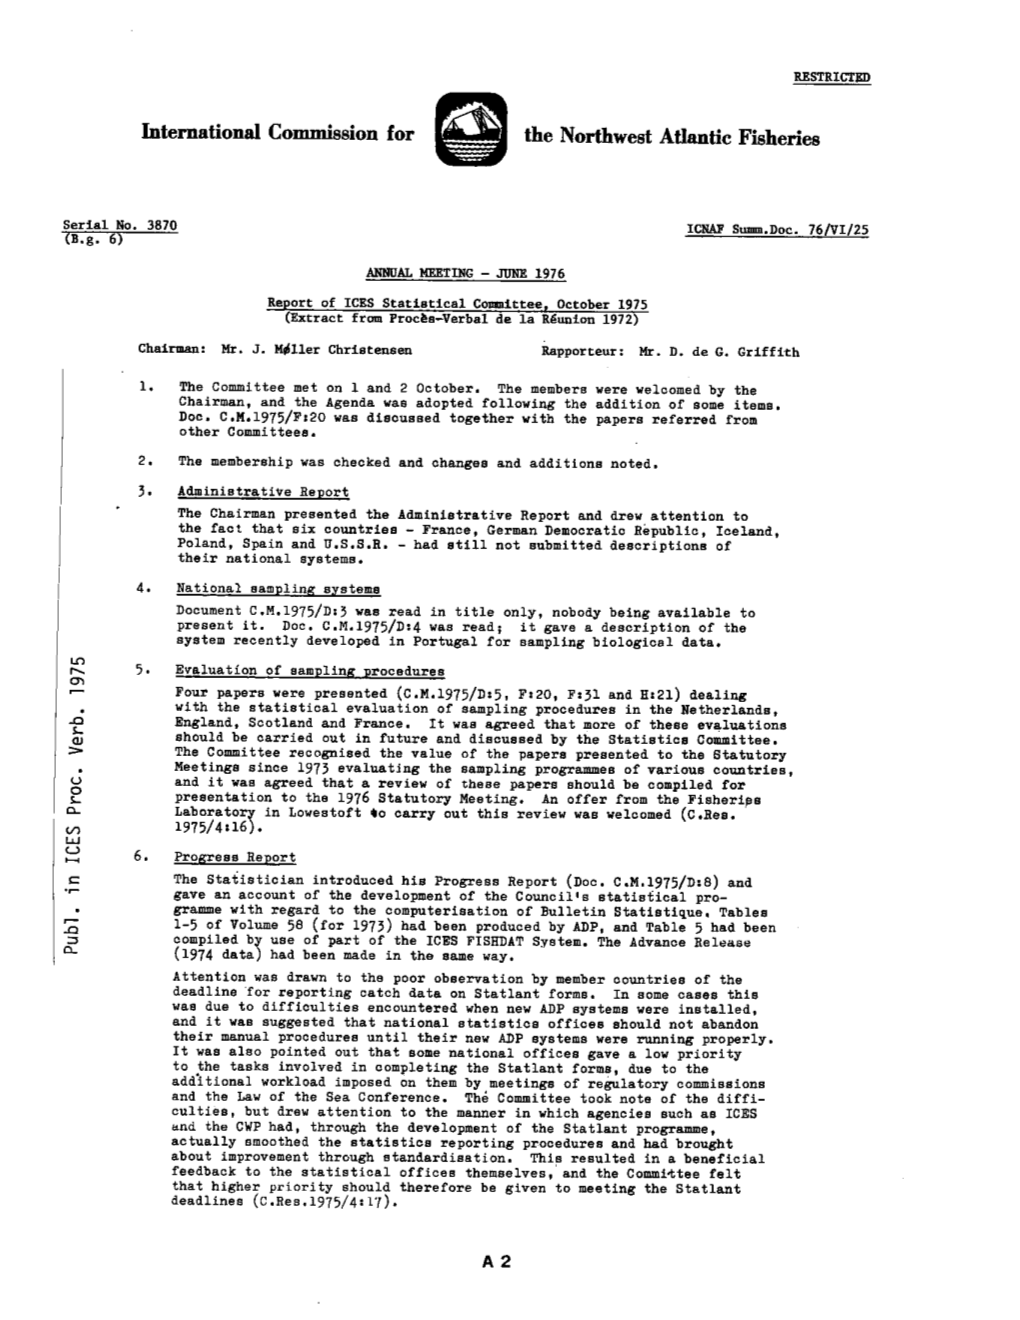 Report of ICES Statistical Committee, October 1975